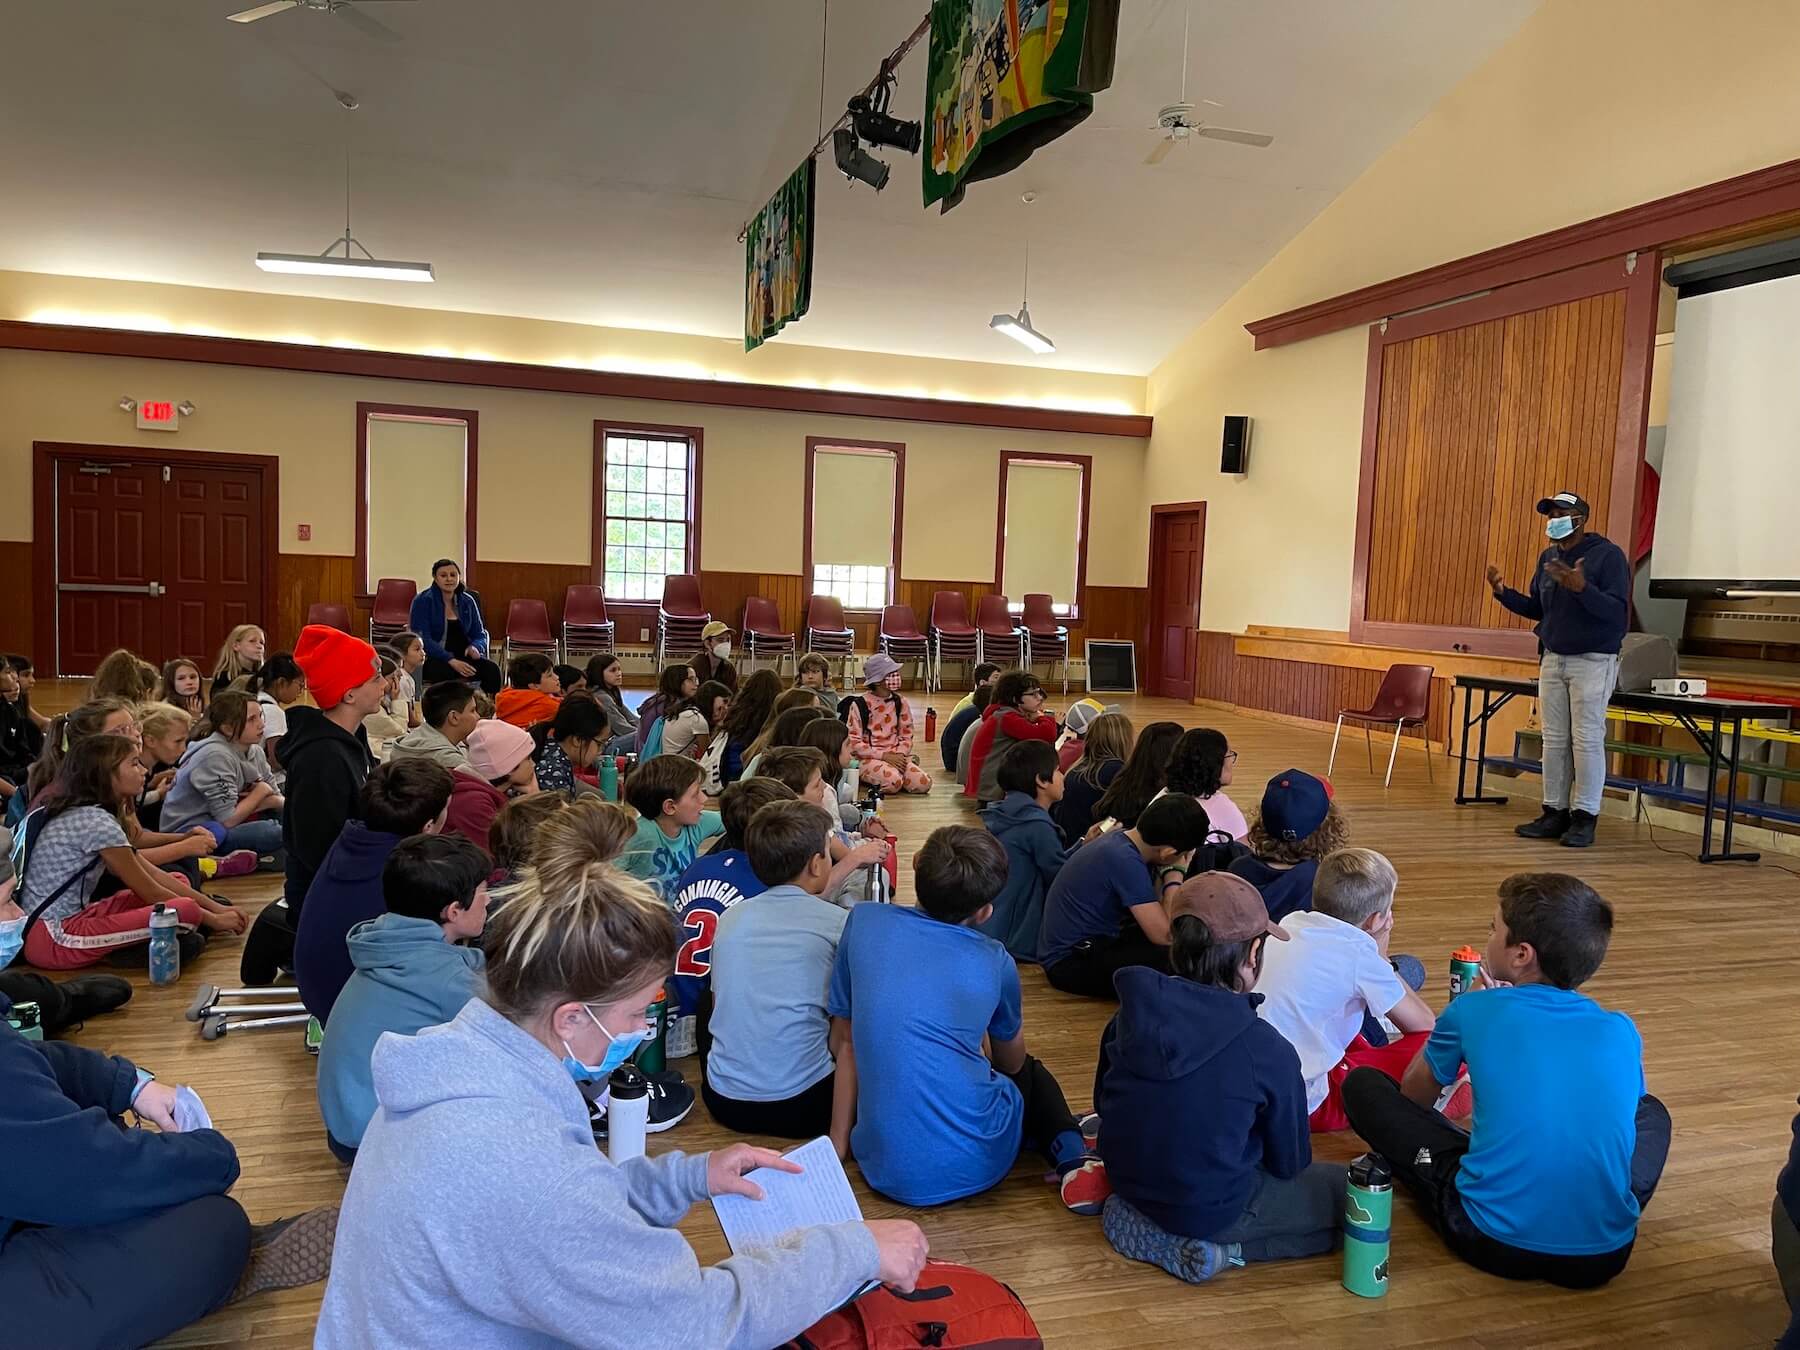 Students sit gathered on the floor as a counselor from Nature's Classroom instructs the group.